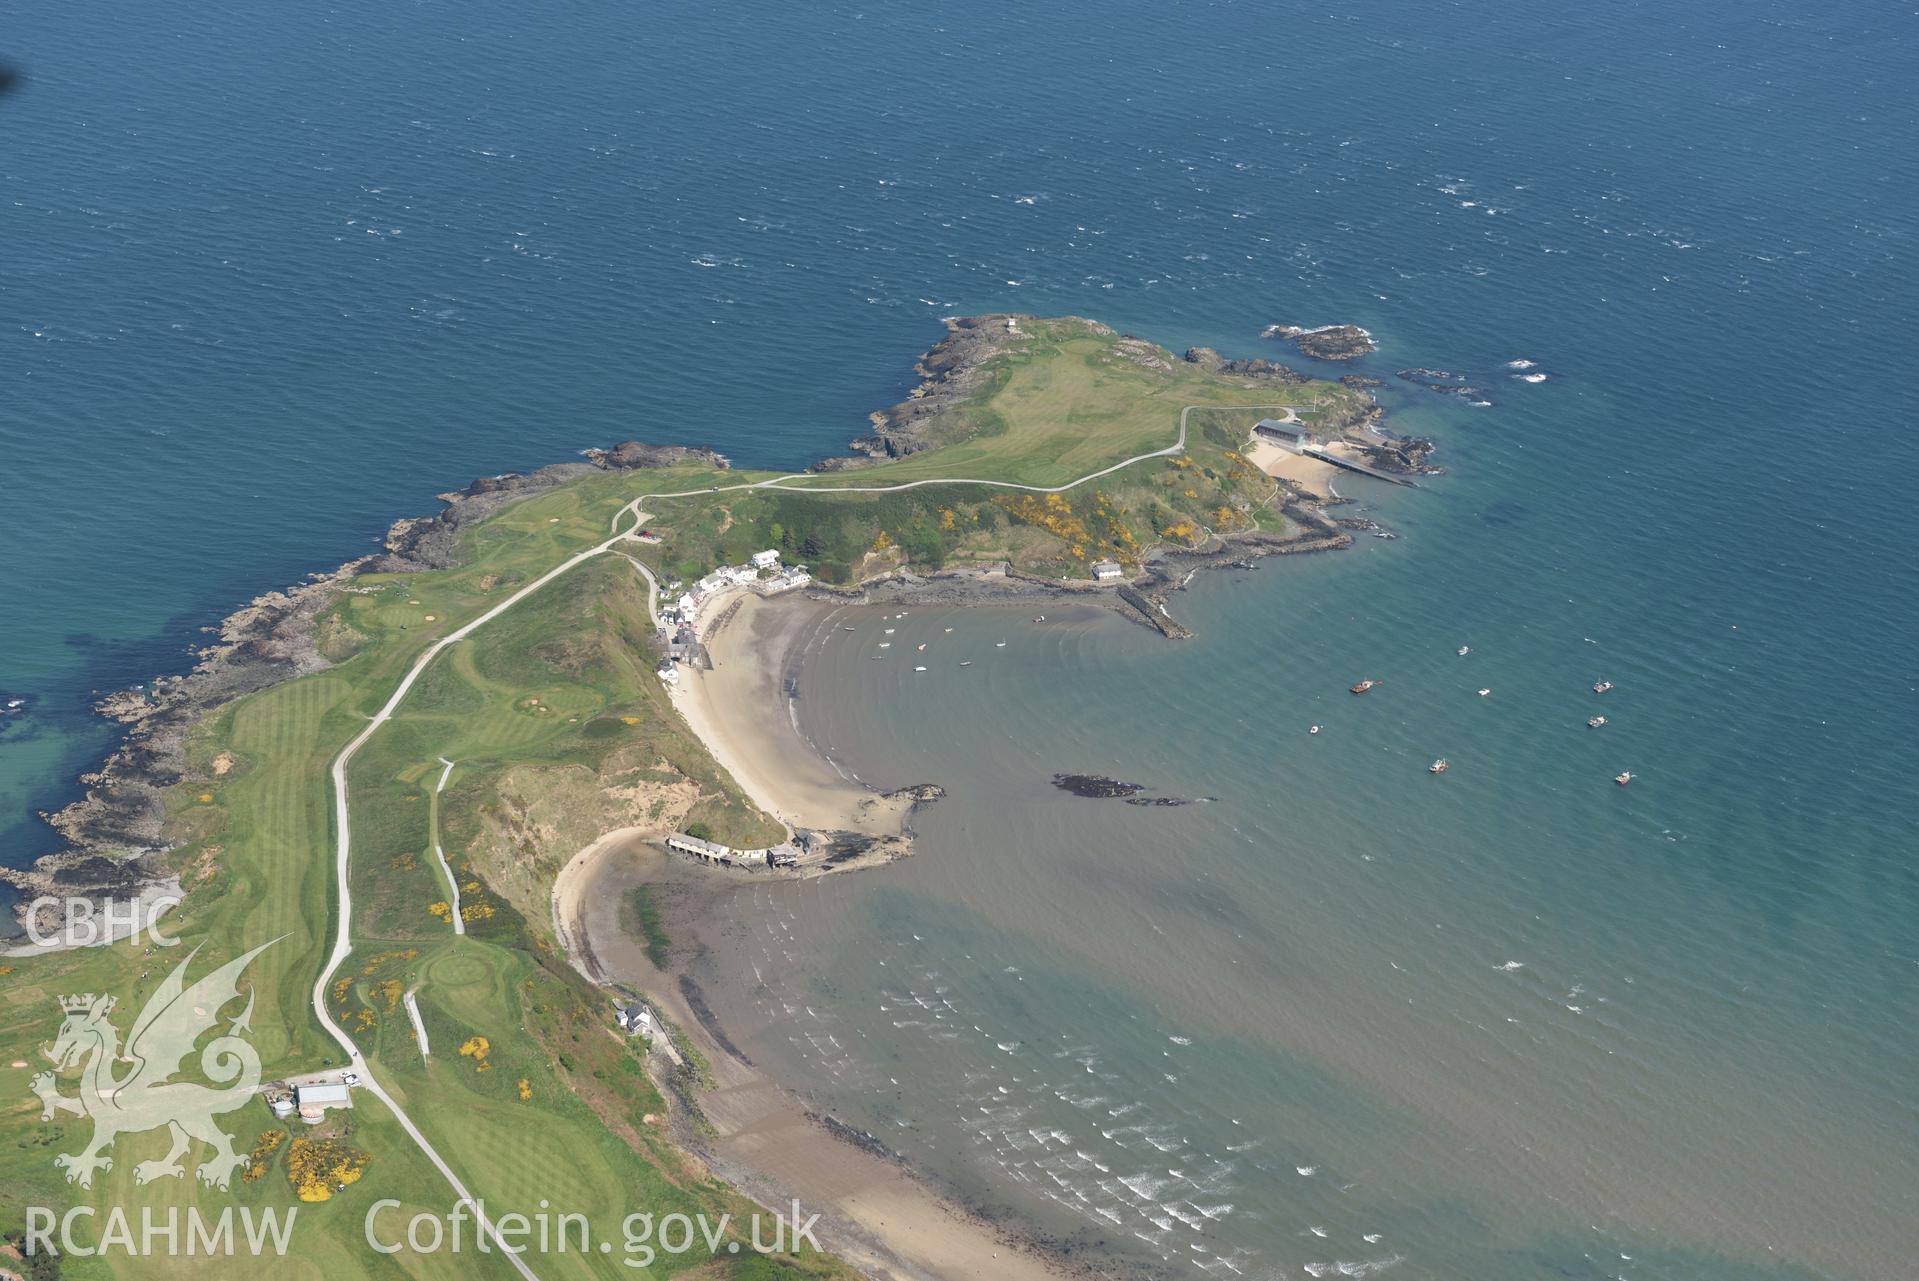 Aerial photography of Porth Dinllaen taken on 3rd May 2017.  Baseline aerial reconnaissance survey for the CHERISH Project. ? Crown: CHERISH PROJECT 2017. Produced with EU funds through the Ireland Wales Co-operation Programme 2014-2020. All material made freely available through the Open Government Licence.